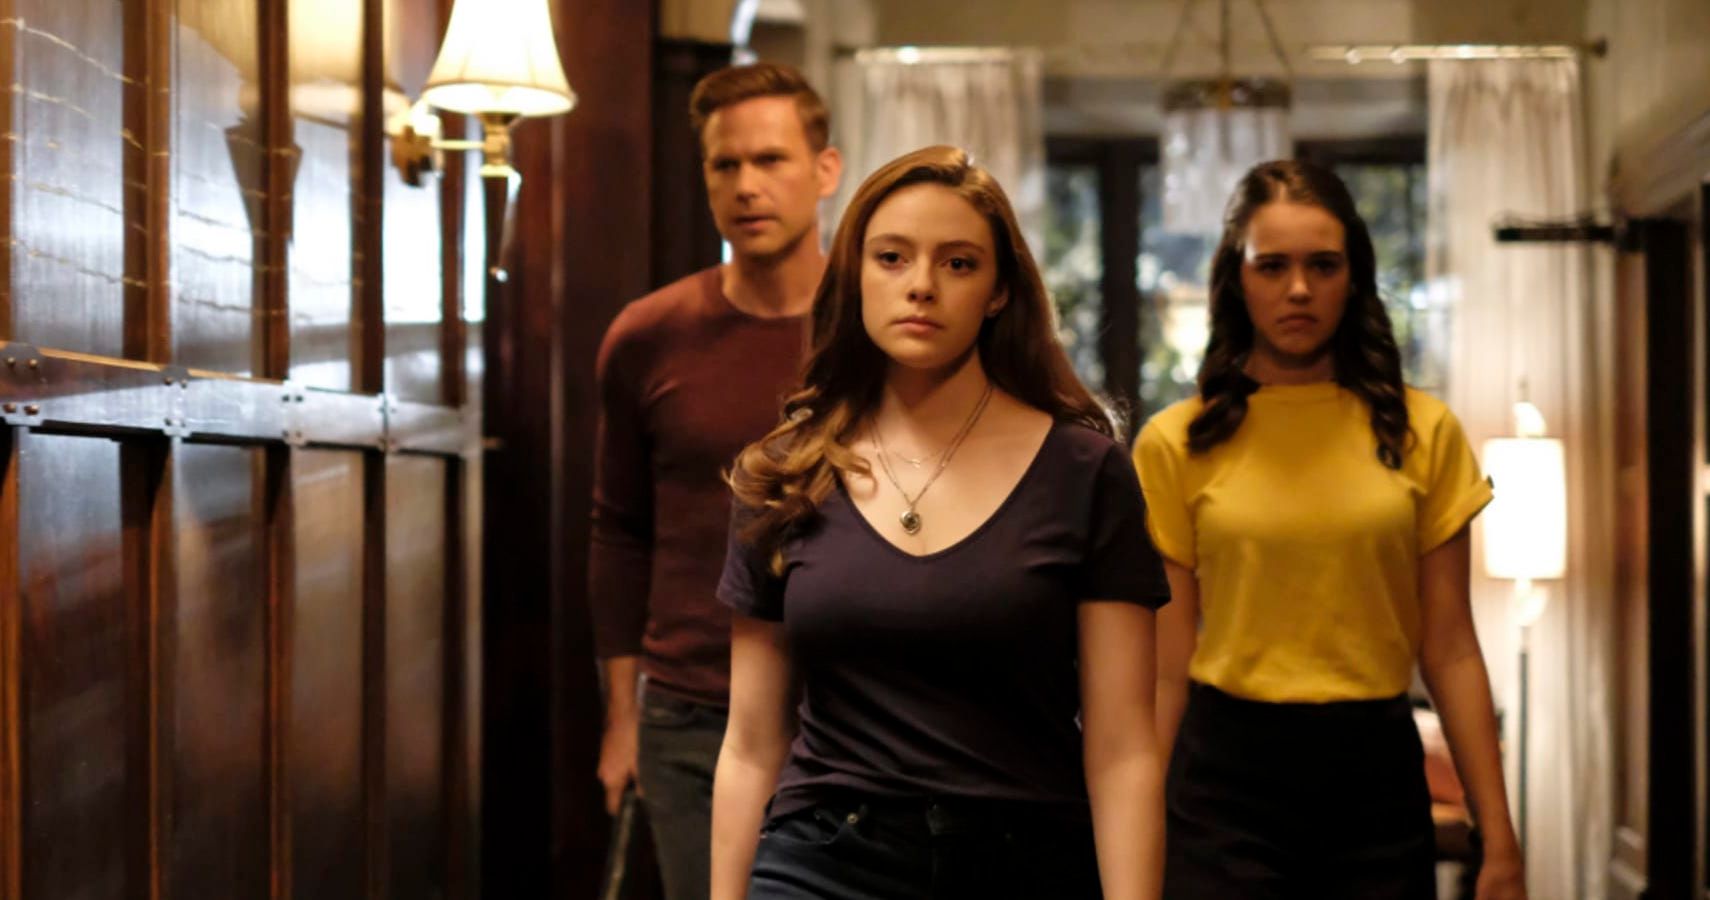 The Originals The Main Characters Ranked By Power